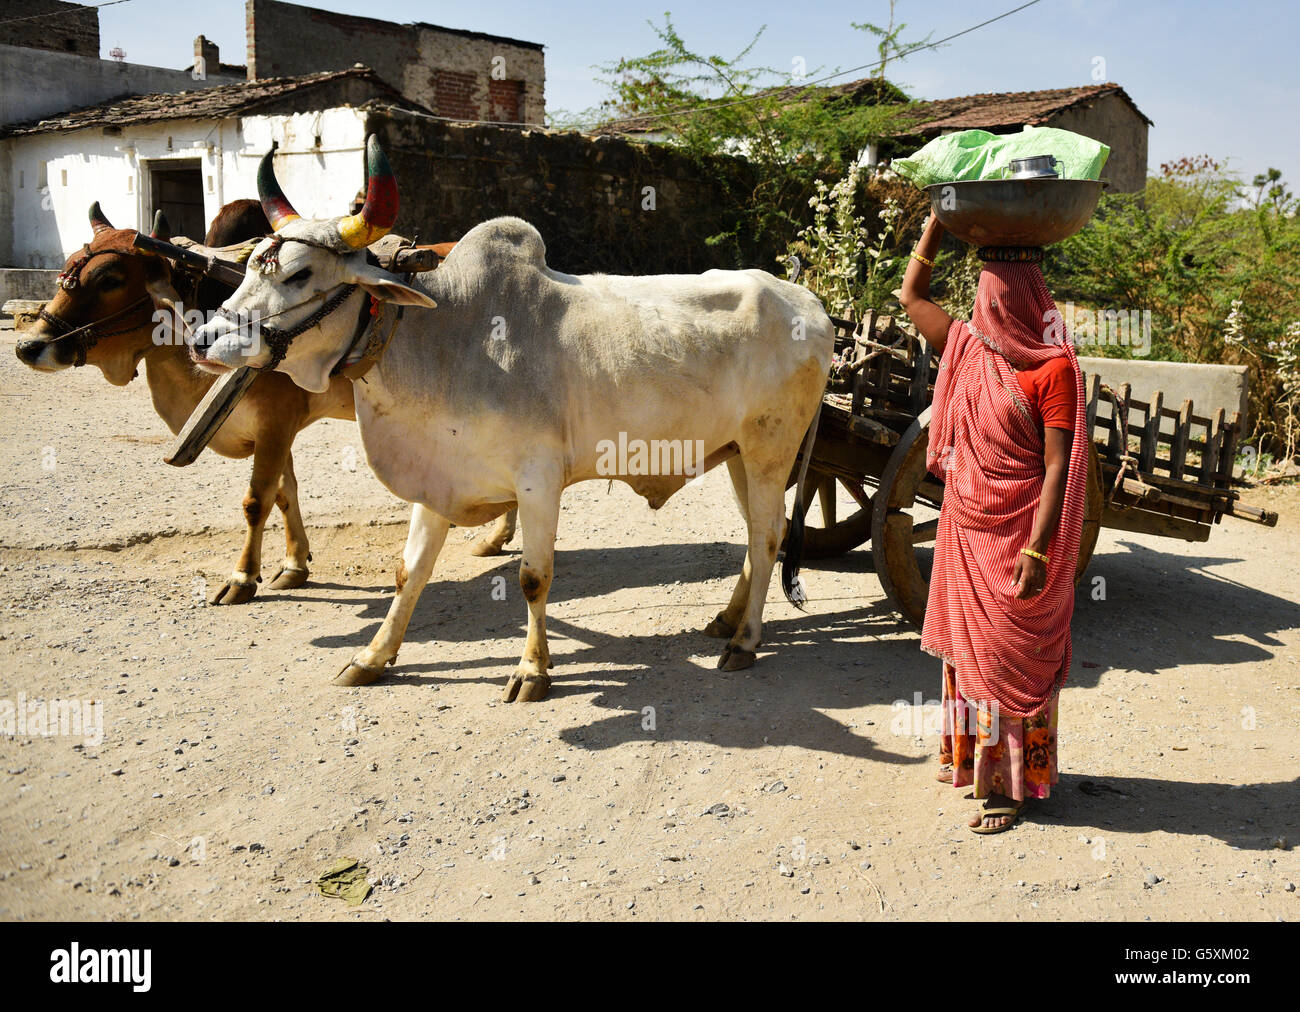 Authentic portrait of Indian woman with covered face in sari and carrying a basket with presents on her head just outside farm house near a bull cart. Stock Photo